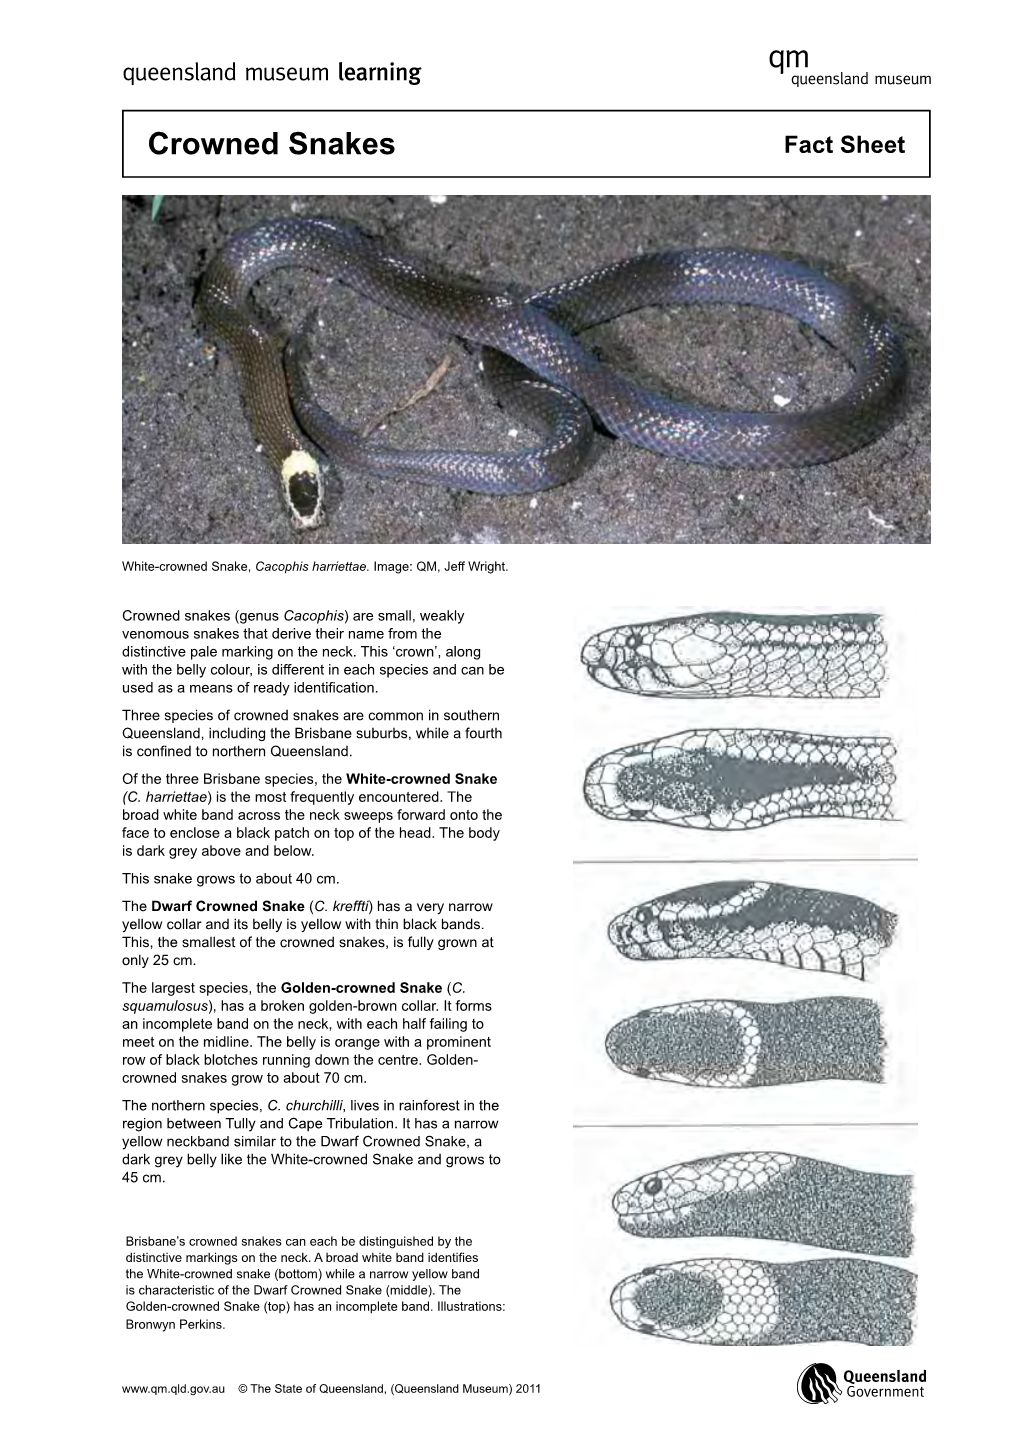 Crowned Snakes Fact Sheet